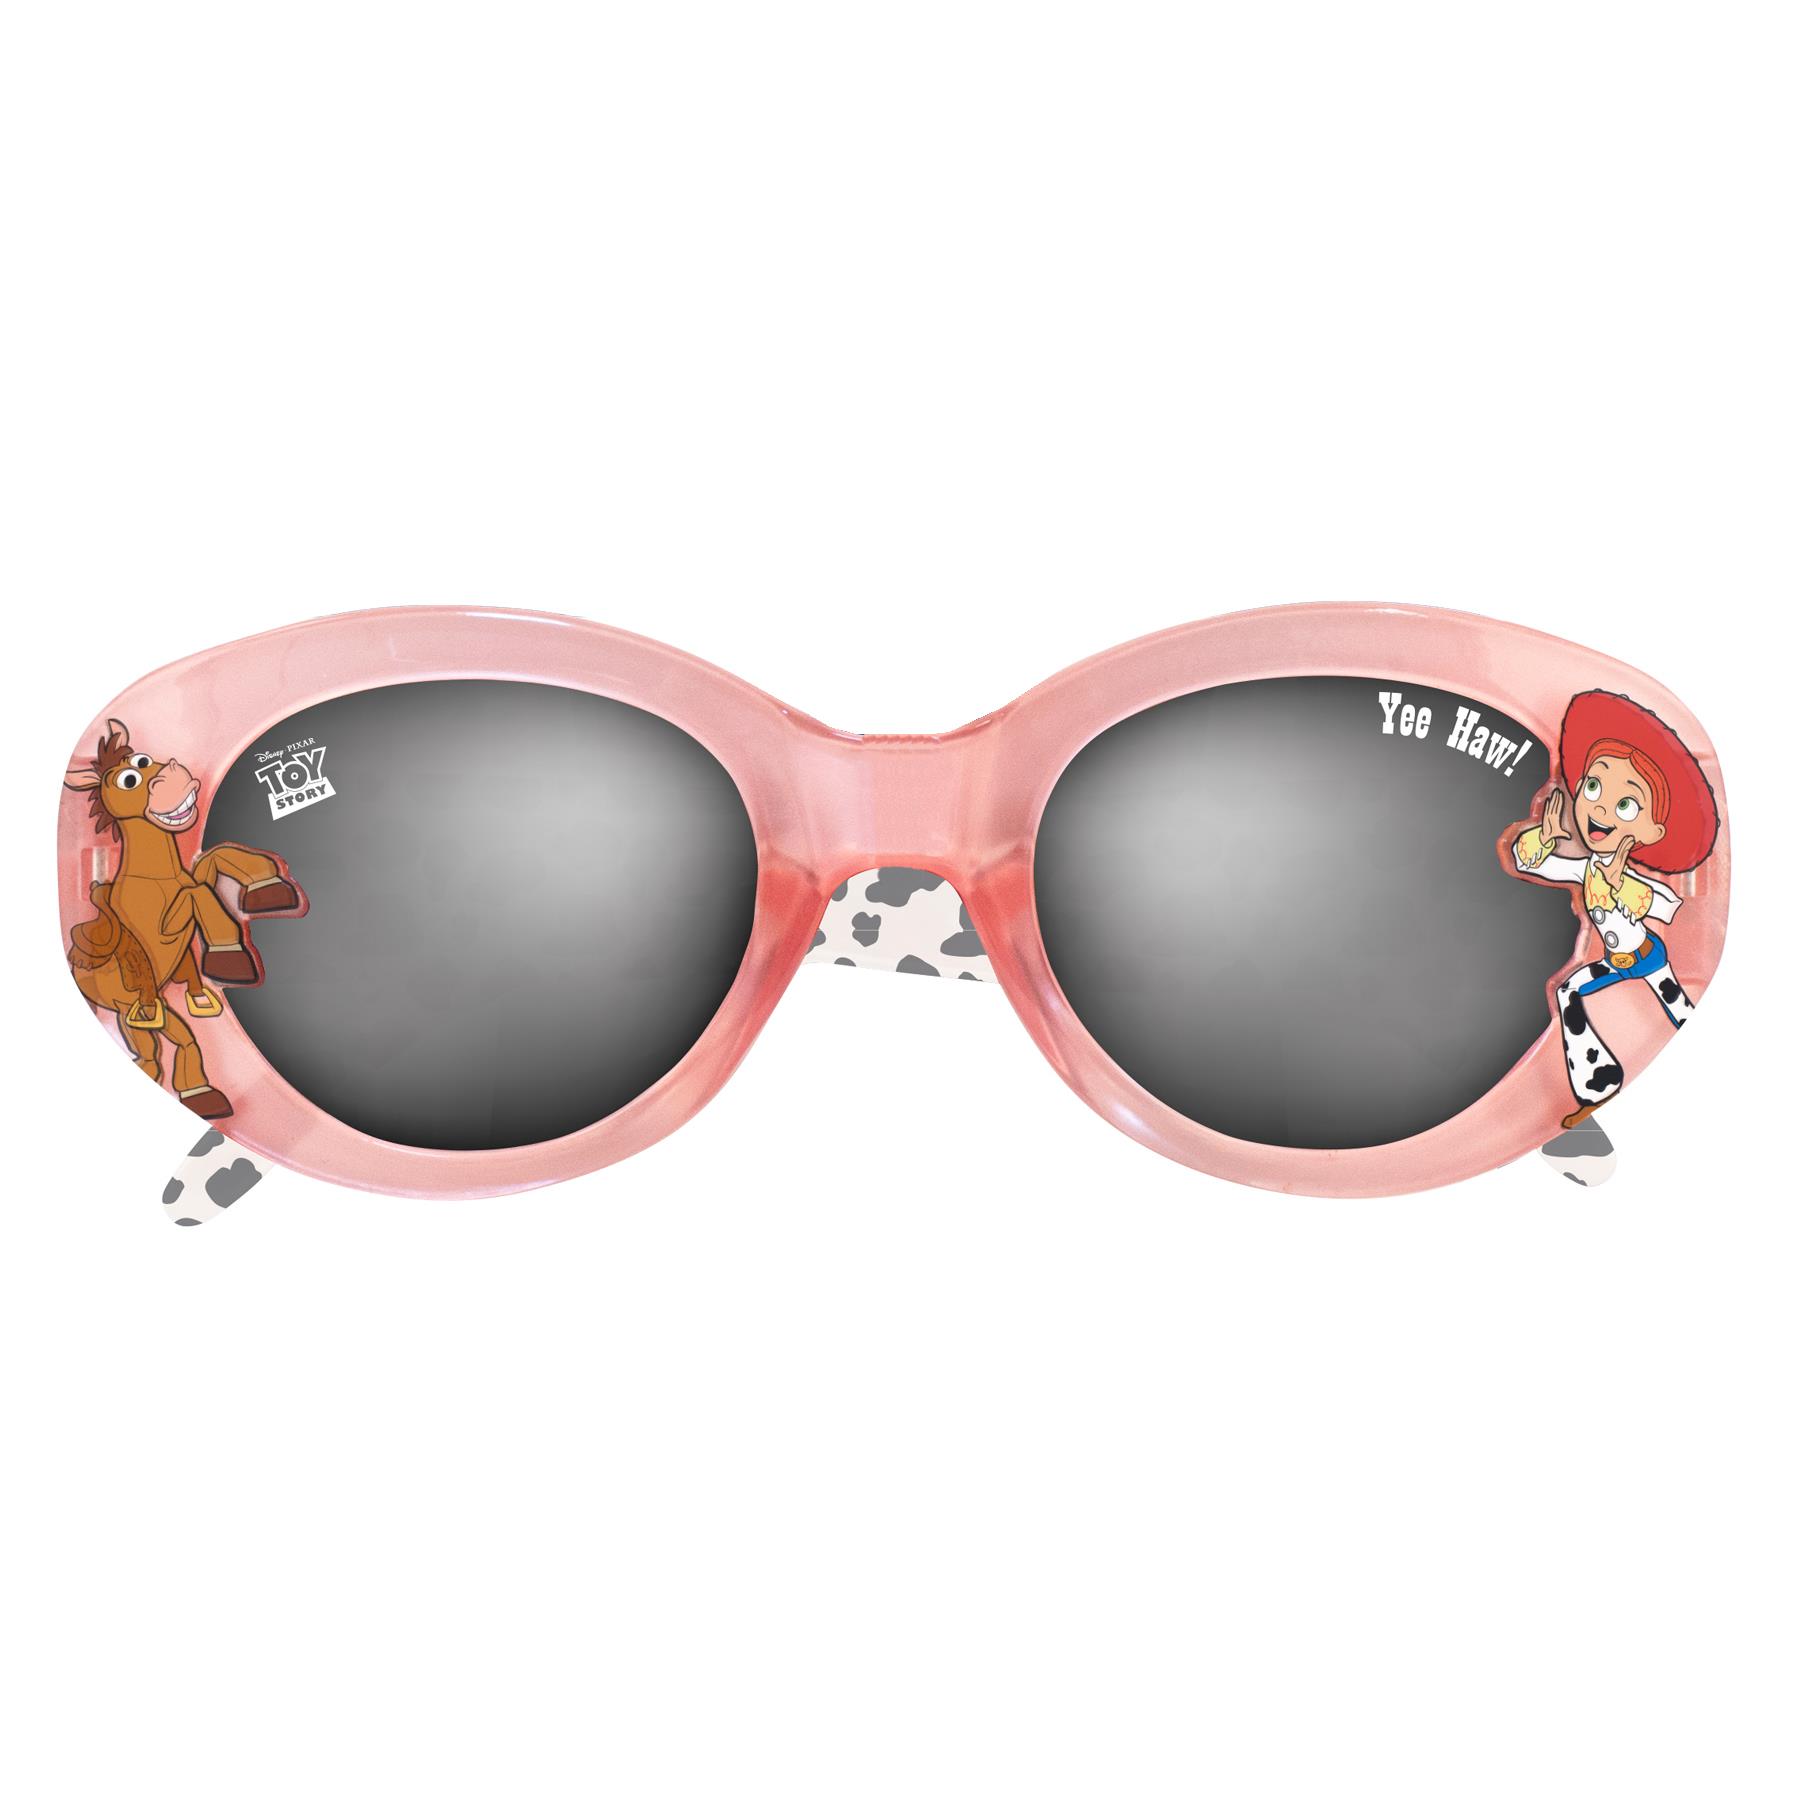 Children's TV Character Sunglasses UV protection for Holiday - Disney Toy Story TOY2